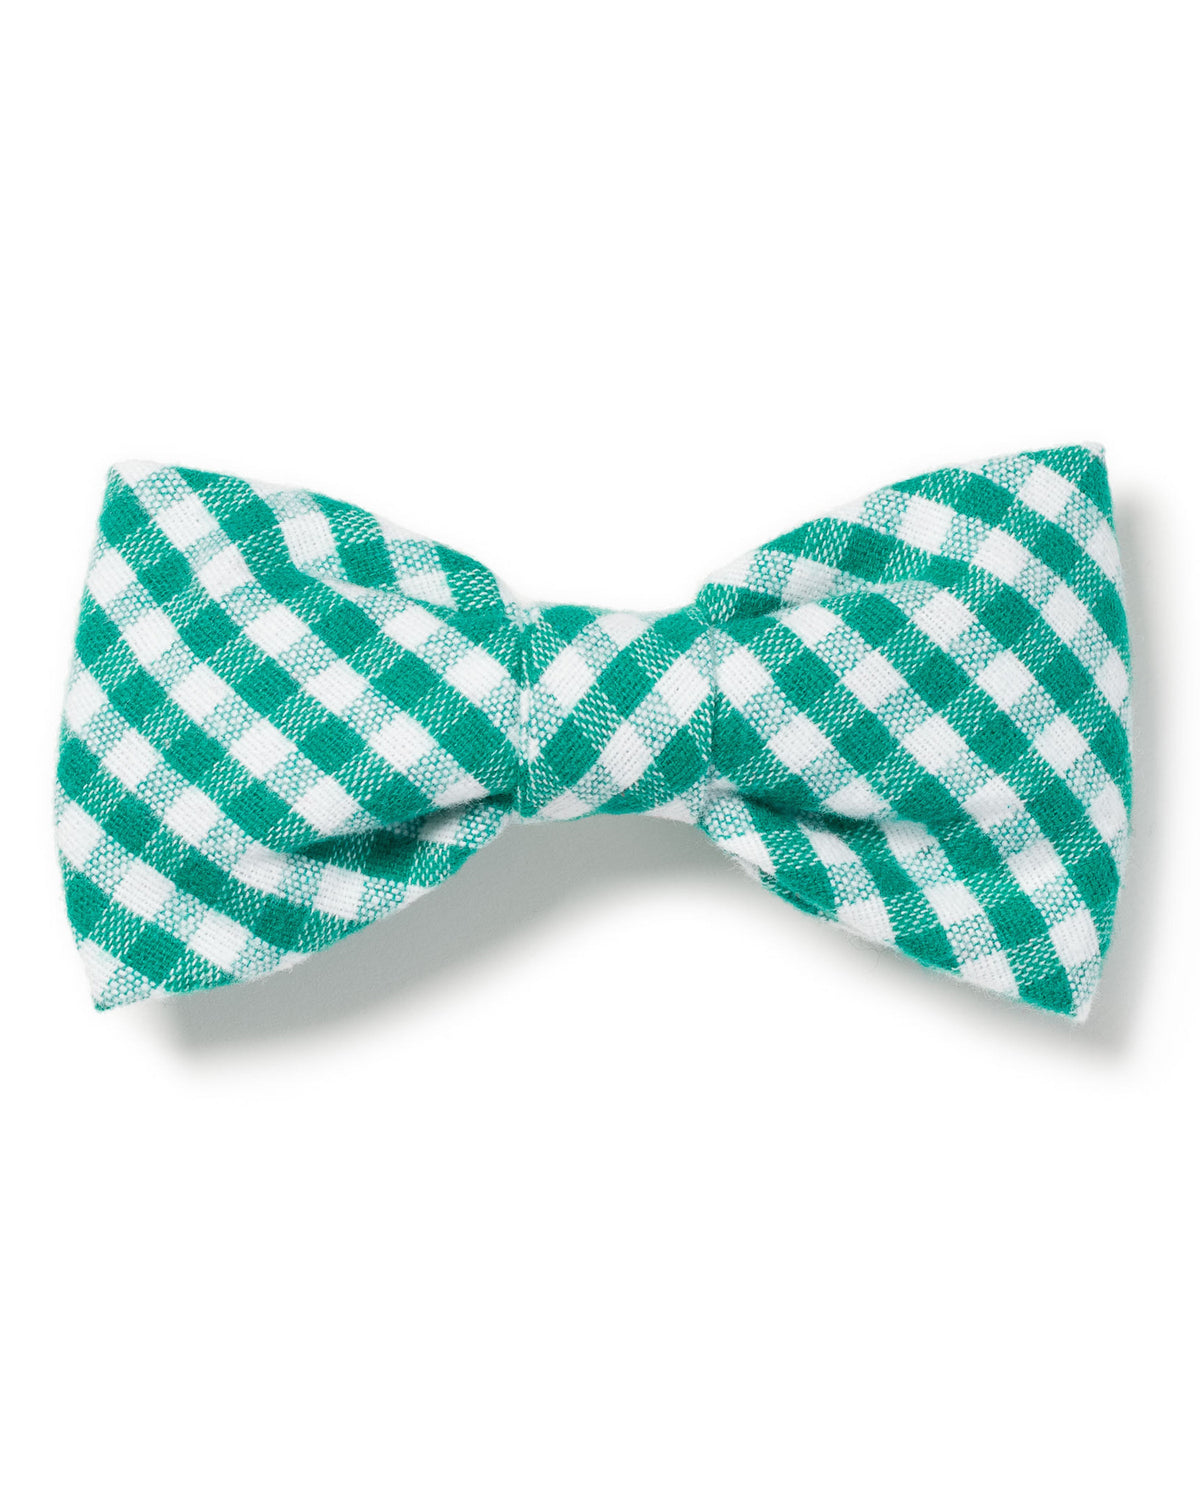 Green Gingham Dog Bow Tie